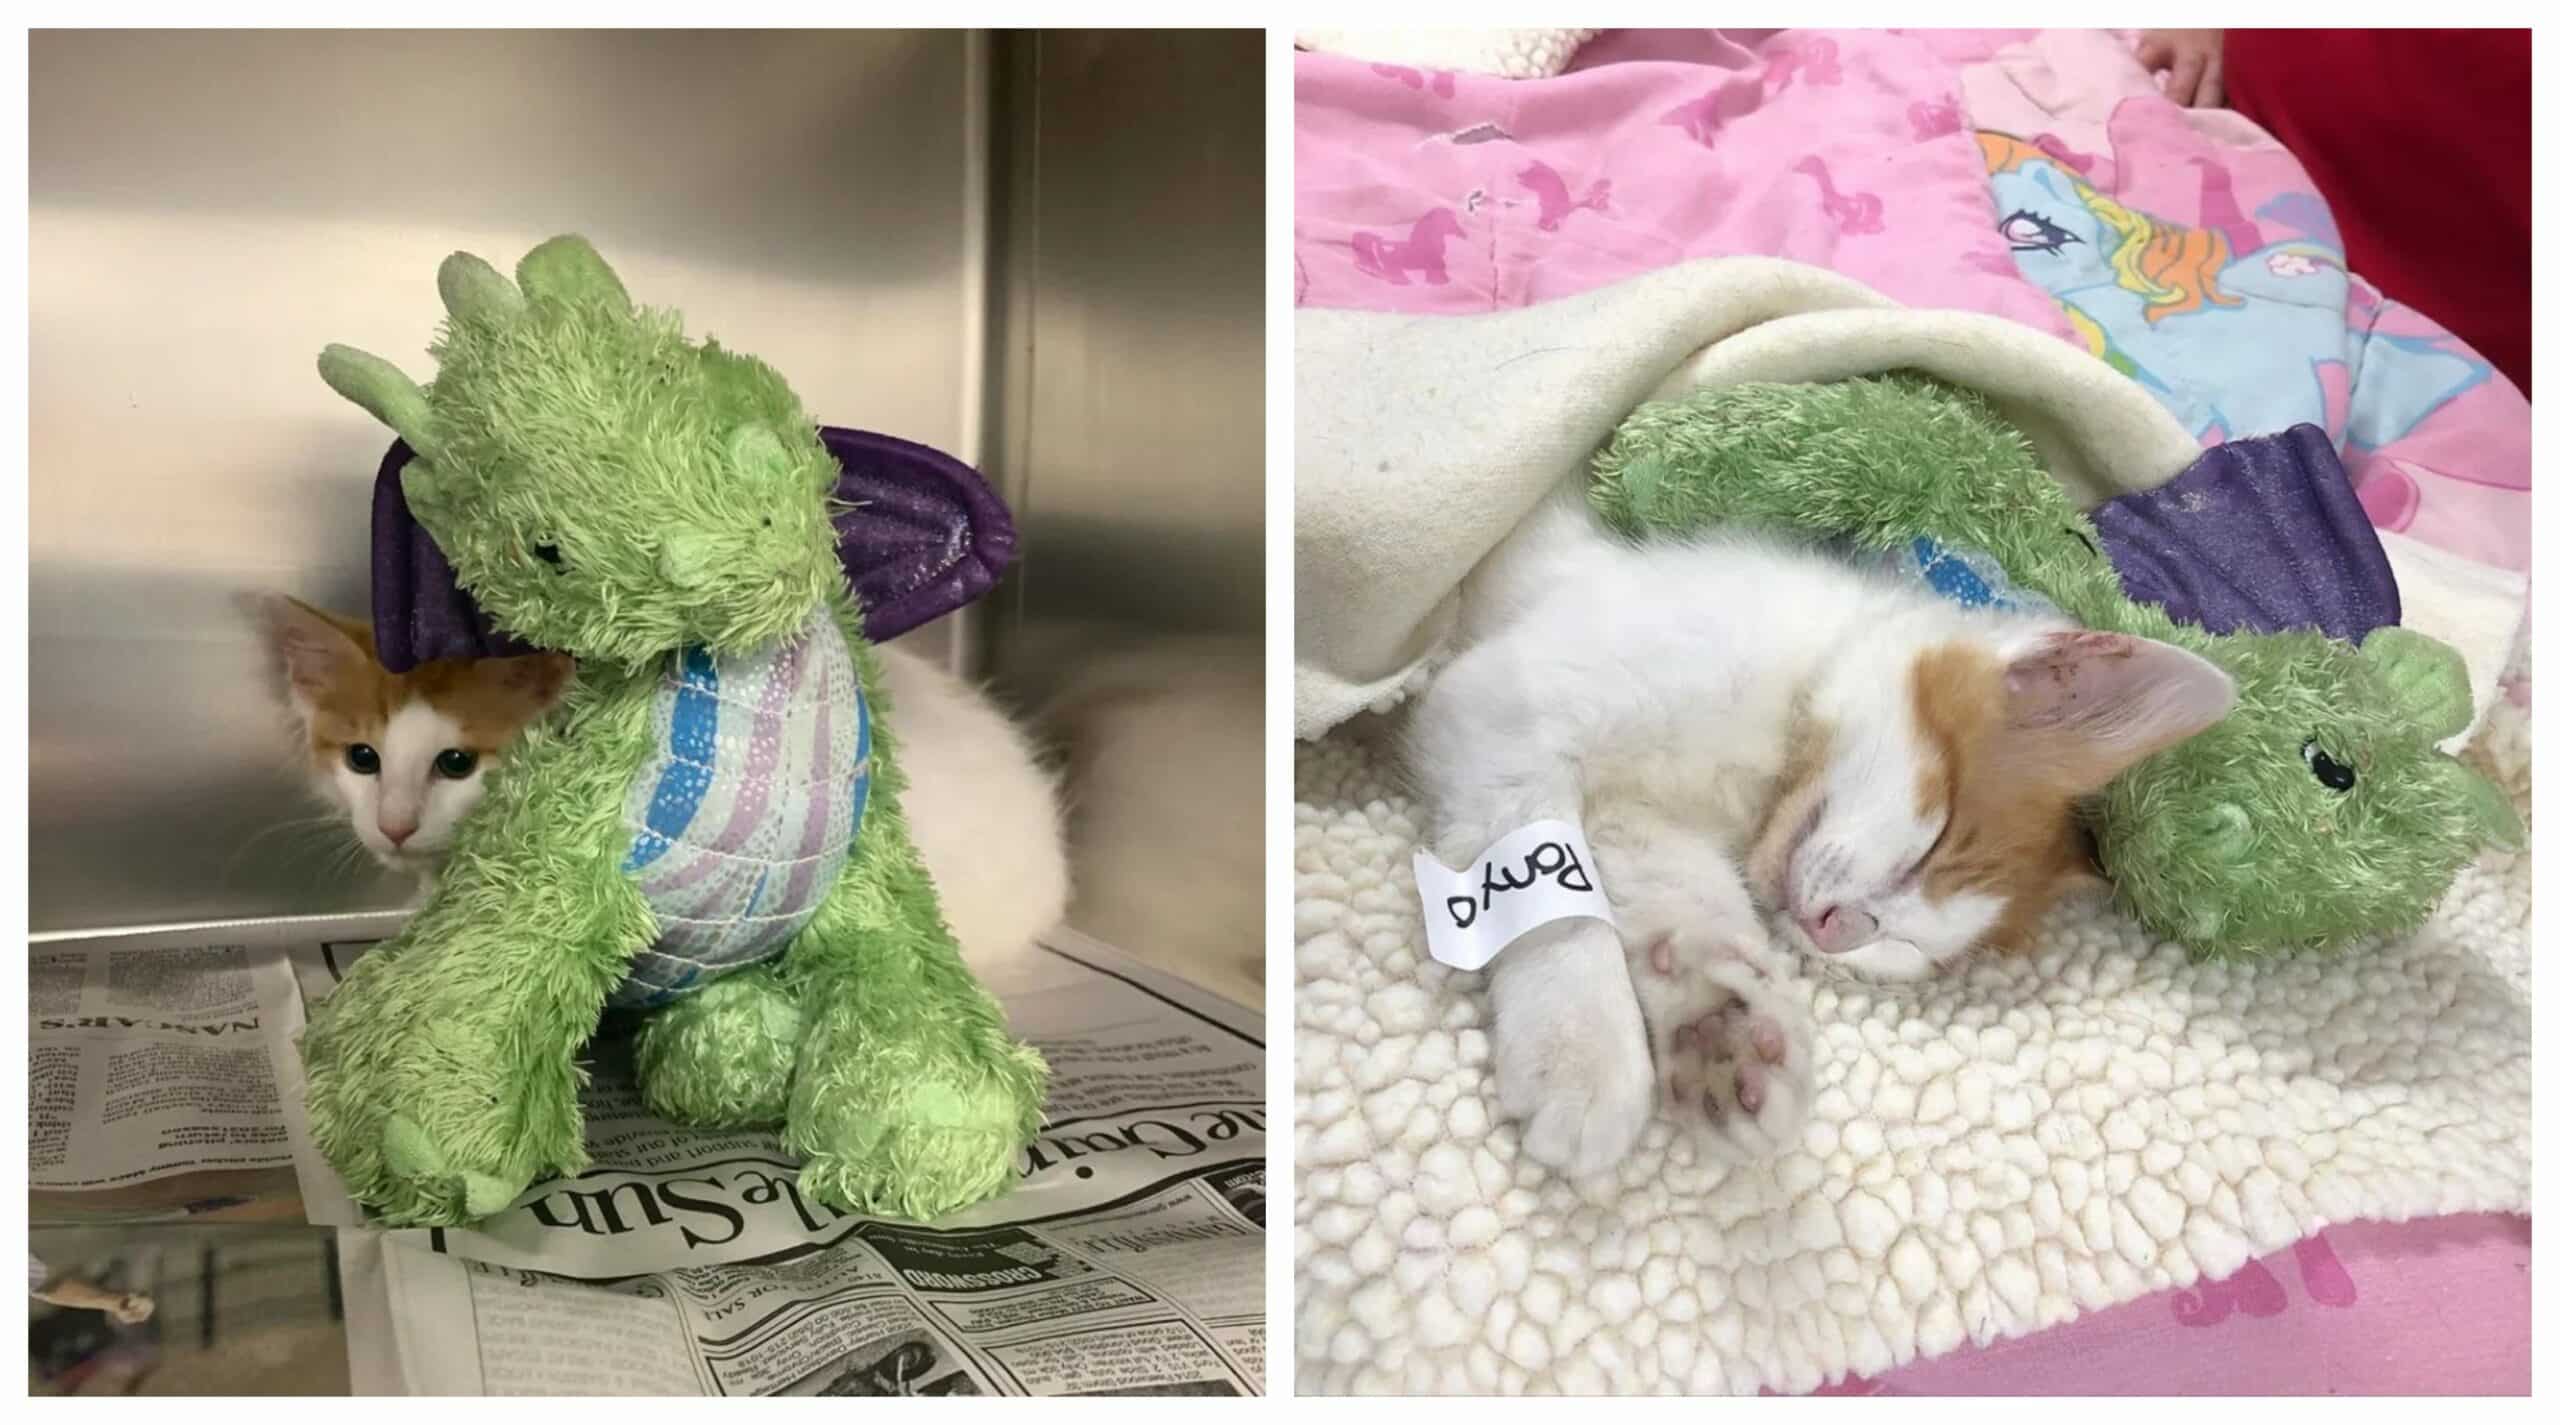 Kitten takes his stuffed dragon friend to the doctor to ensure his safety